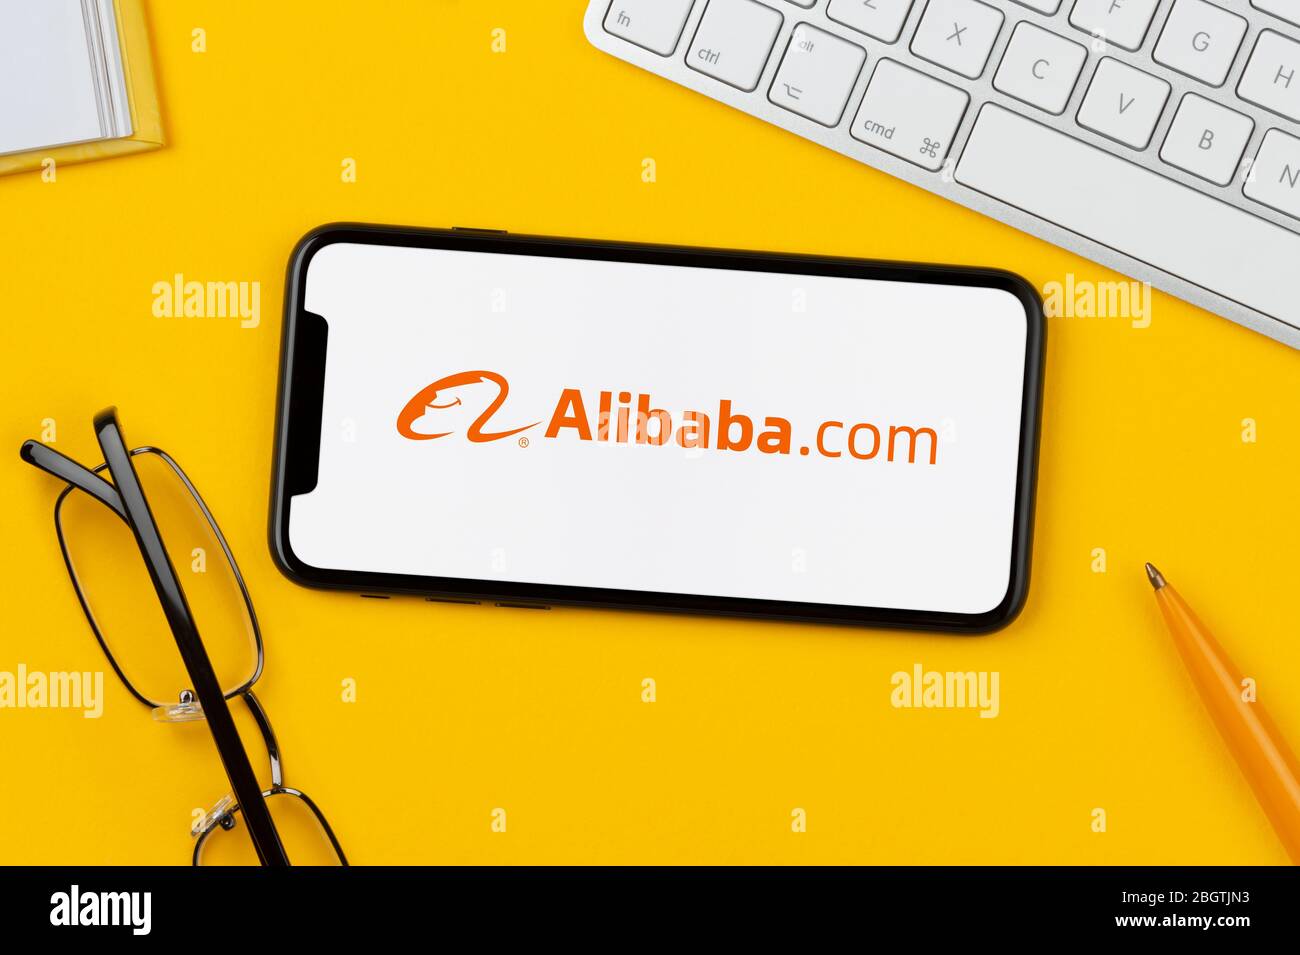 A smartphone showing the Alibaba logo rests on a yellow background along with a keyboard, glasses, pen and book (Editorial use only). Stock Photo